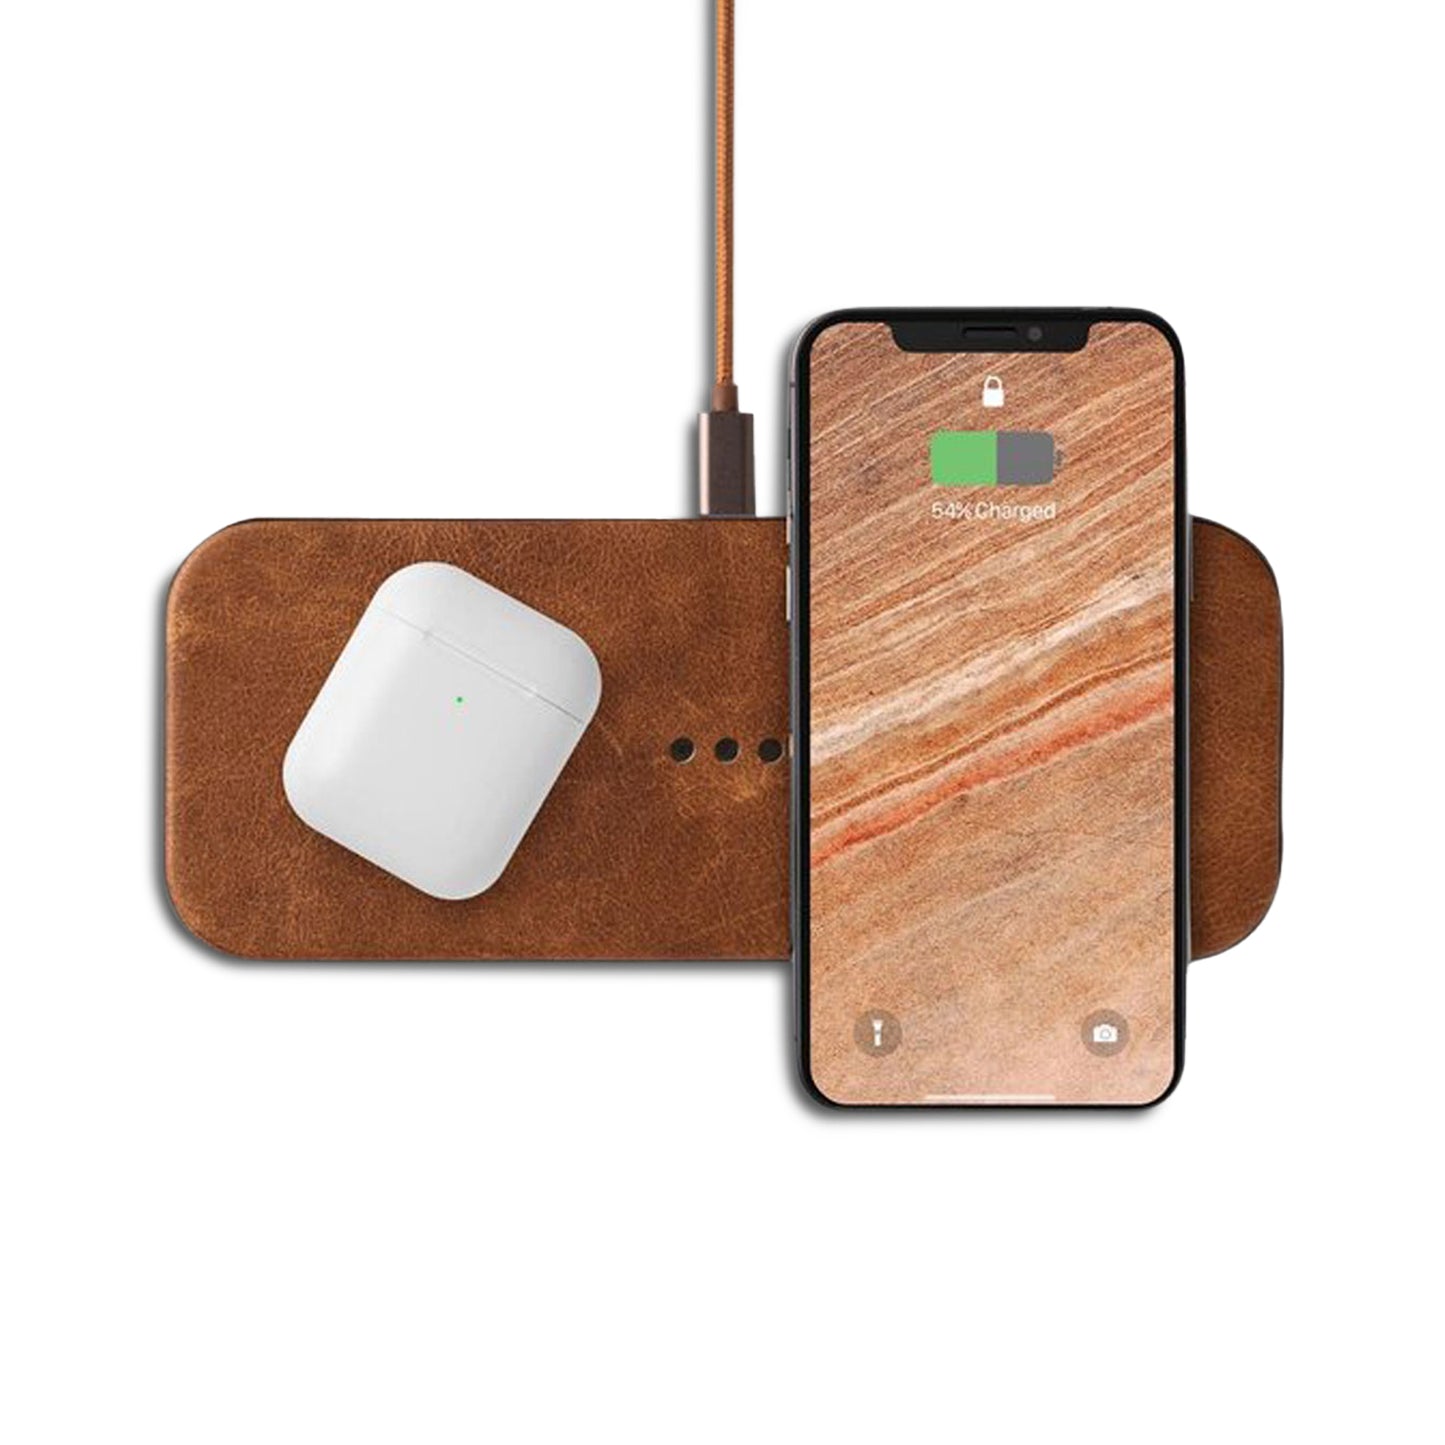 Courant Catch 2 Wireless Charger